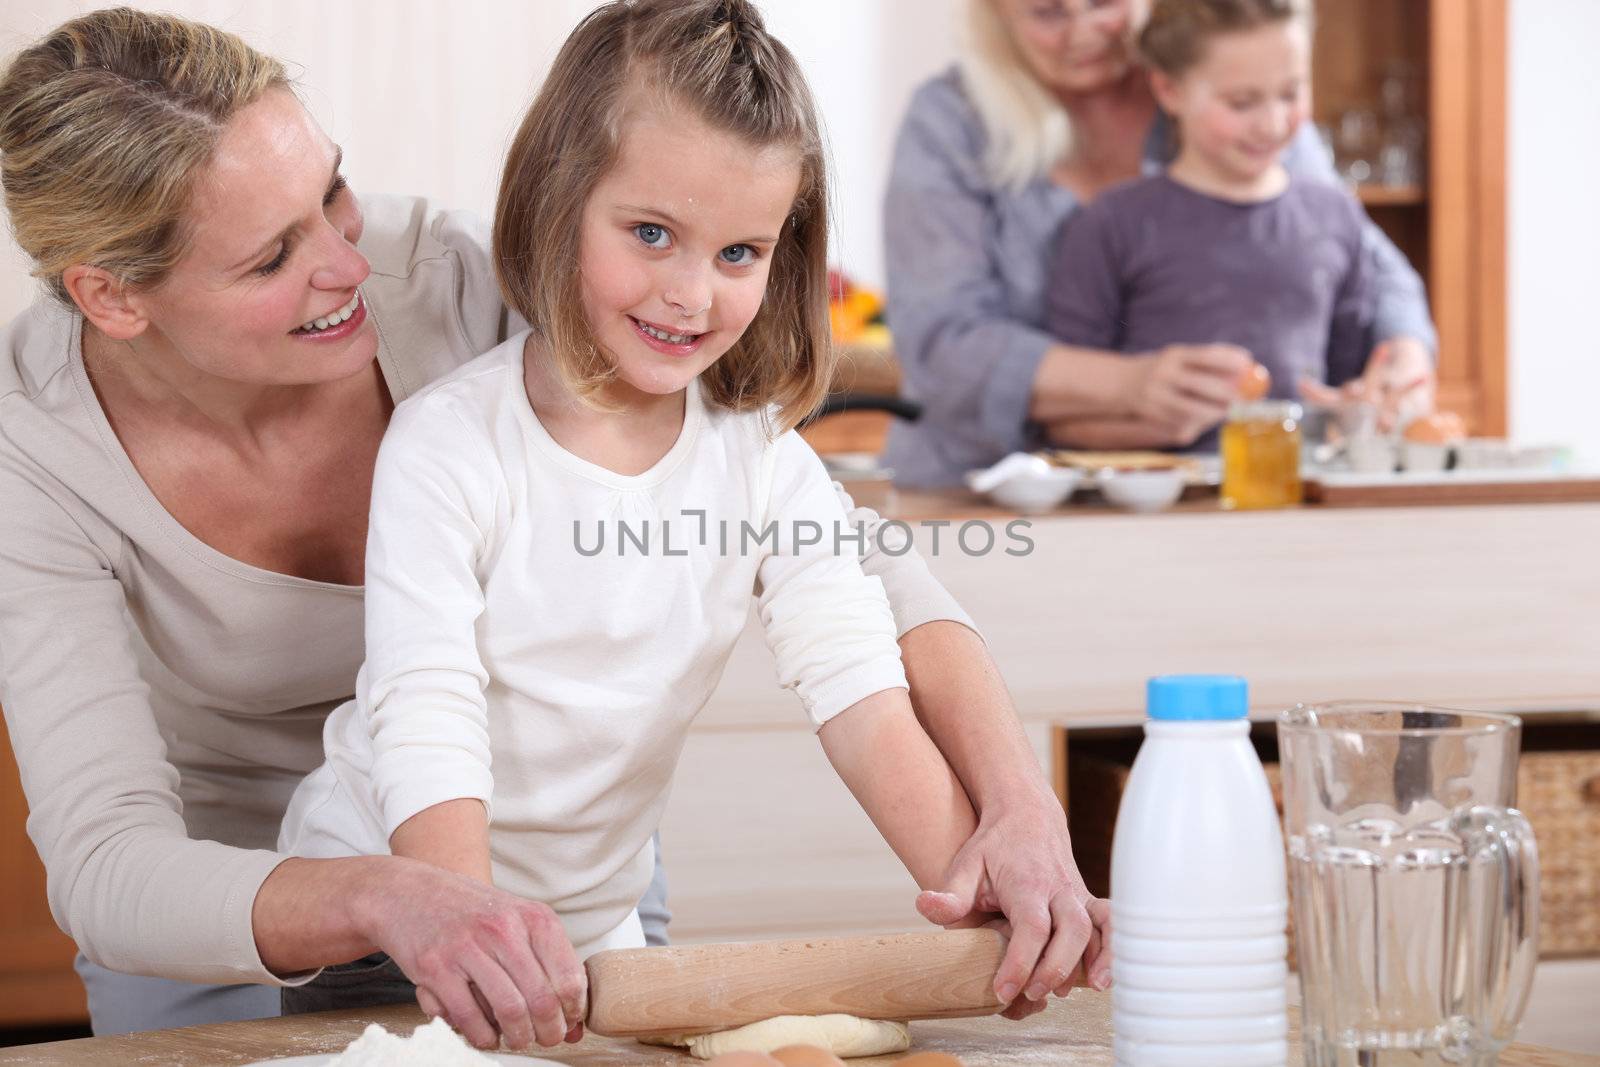 Little girls making cakes by phovoir